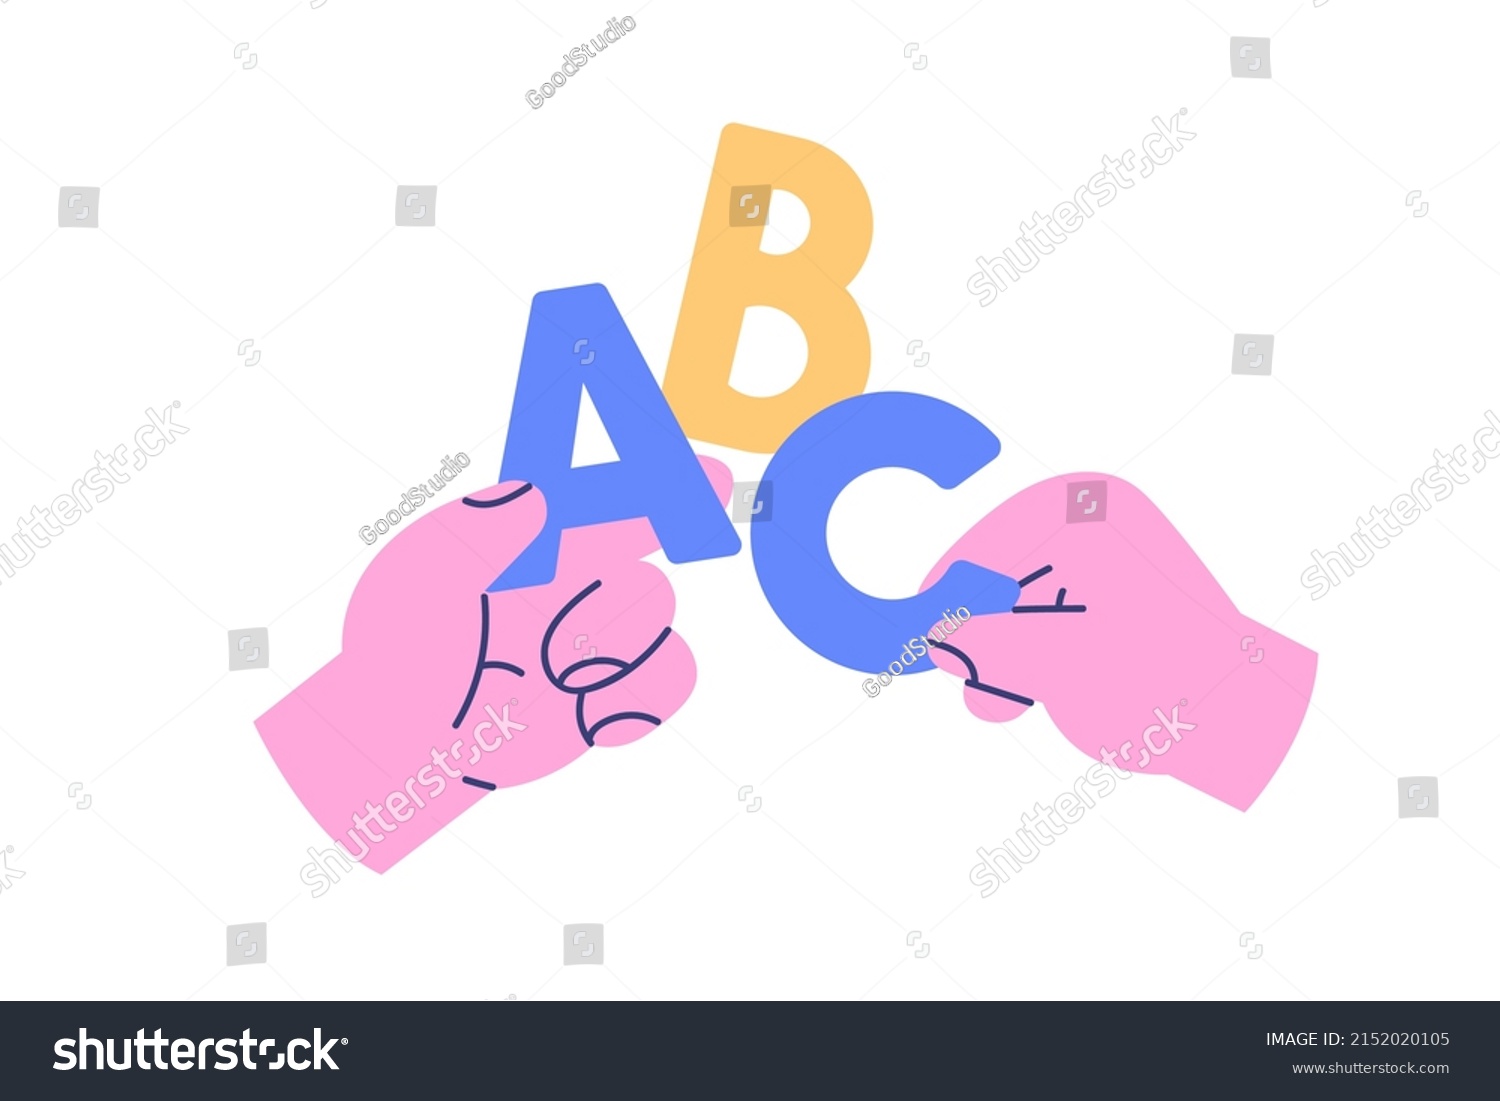 ABC, basic alphabet letters in hands icon. Arms holding A, B, C for kids education, learning, studying. Easy elementary for beginners. Flat graphic vector illustration isolated on white background #2152020105